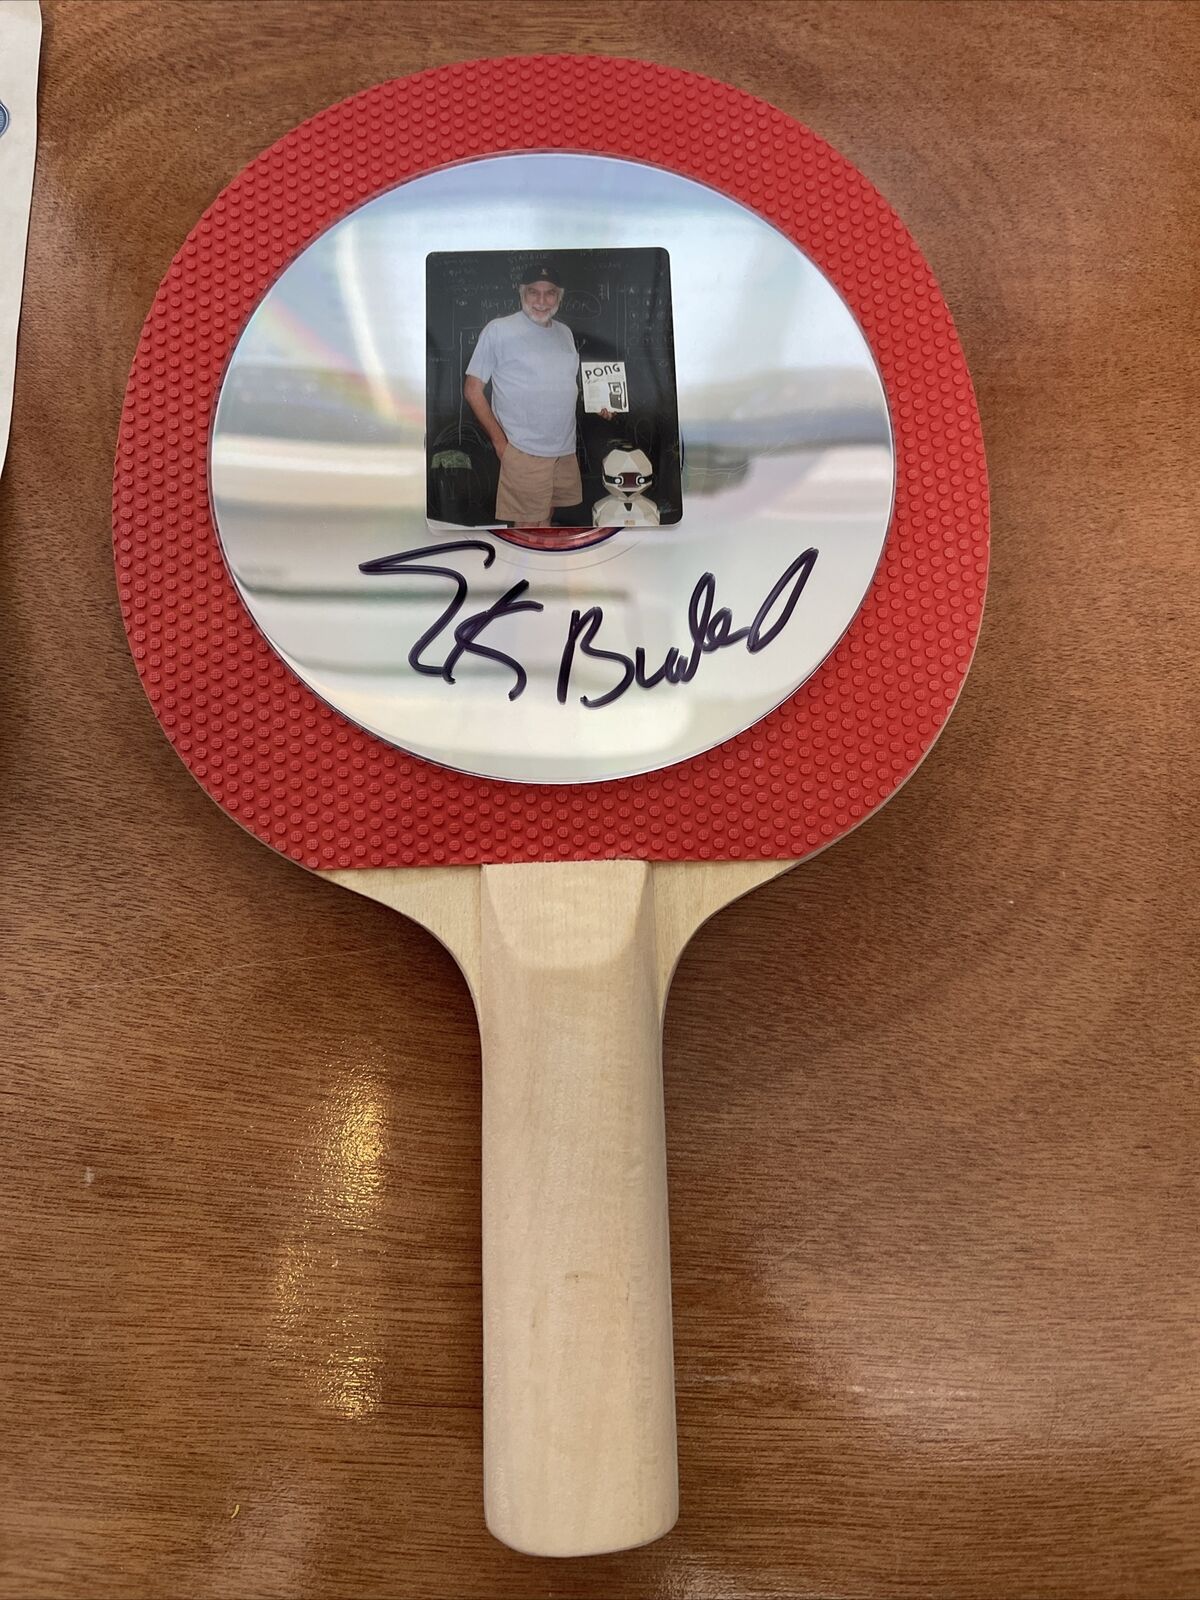 Nolan Bushnell signed autographed Pong Paddle. Authentic 10/10 Red.